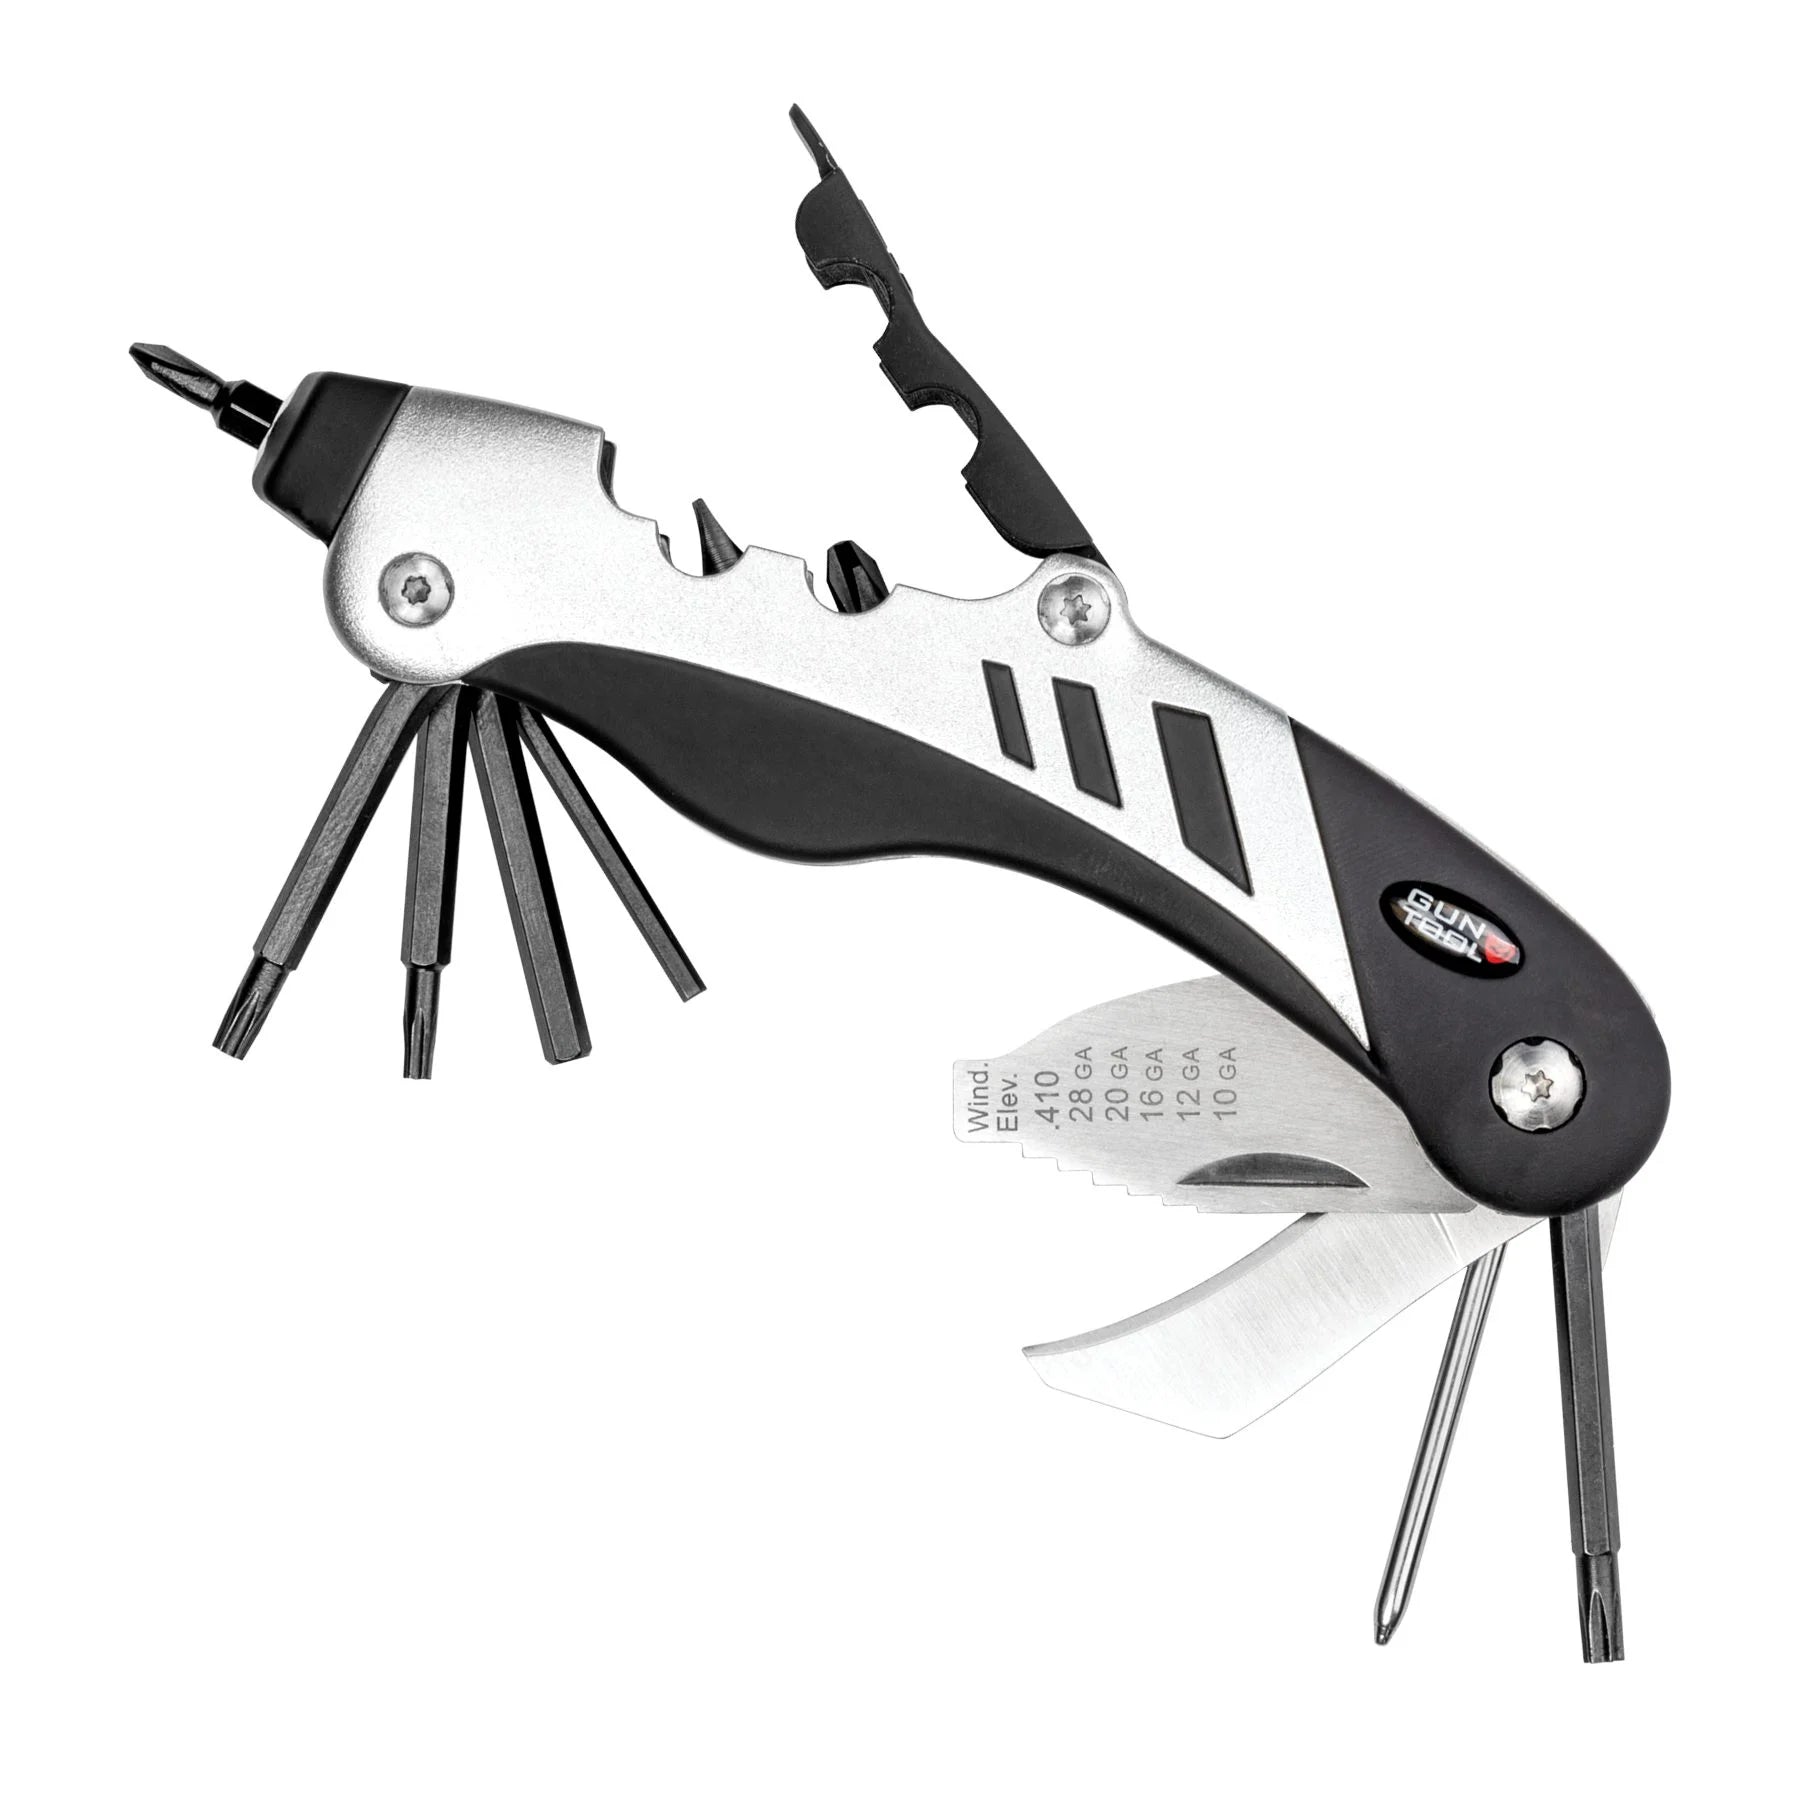 Real Avid The Gun Tool™ AVGTCL211 - Newest Products